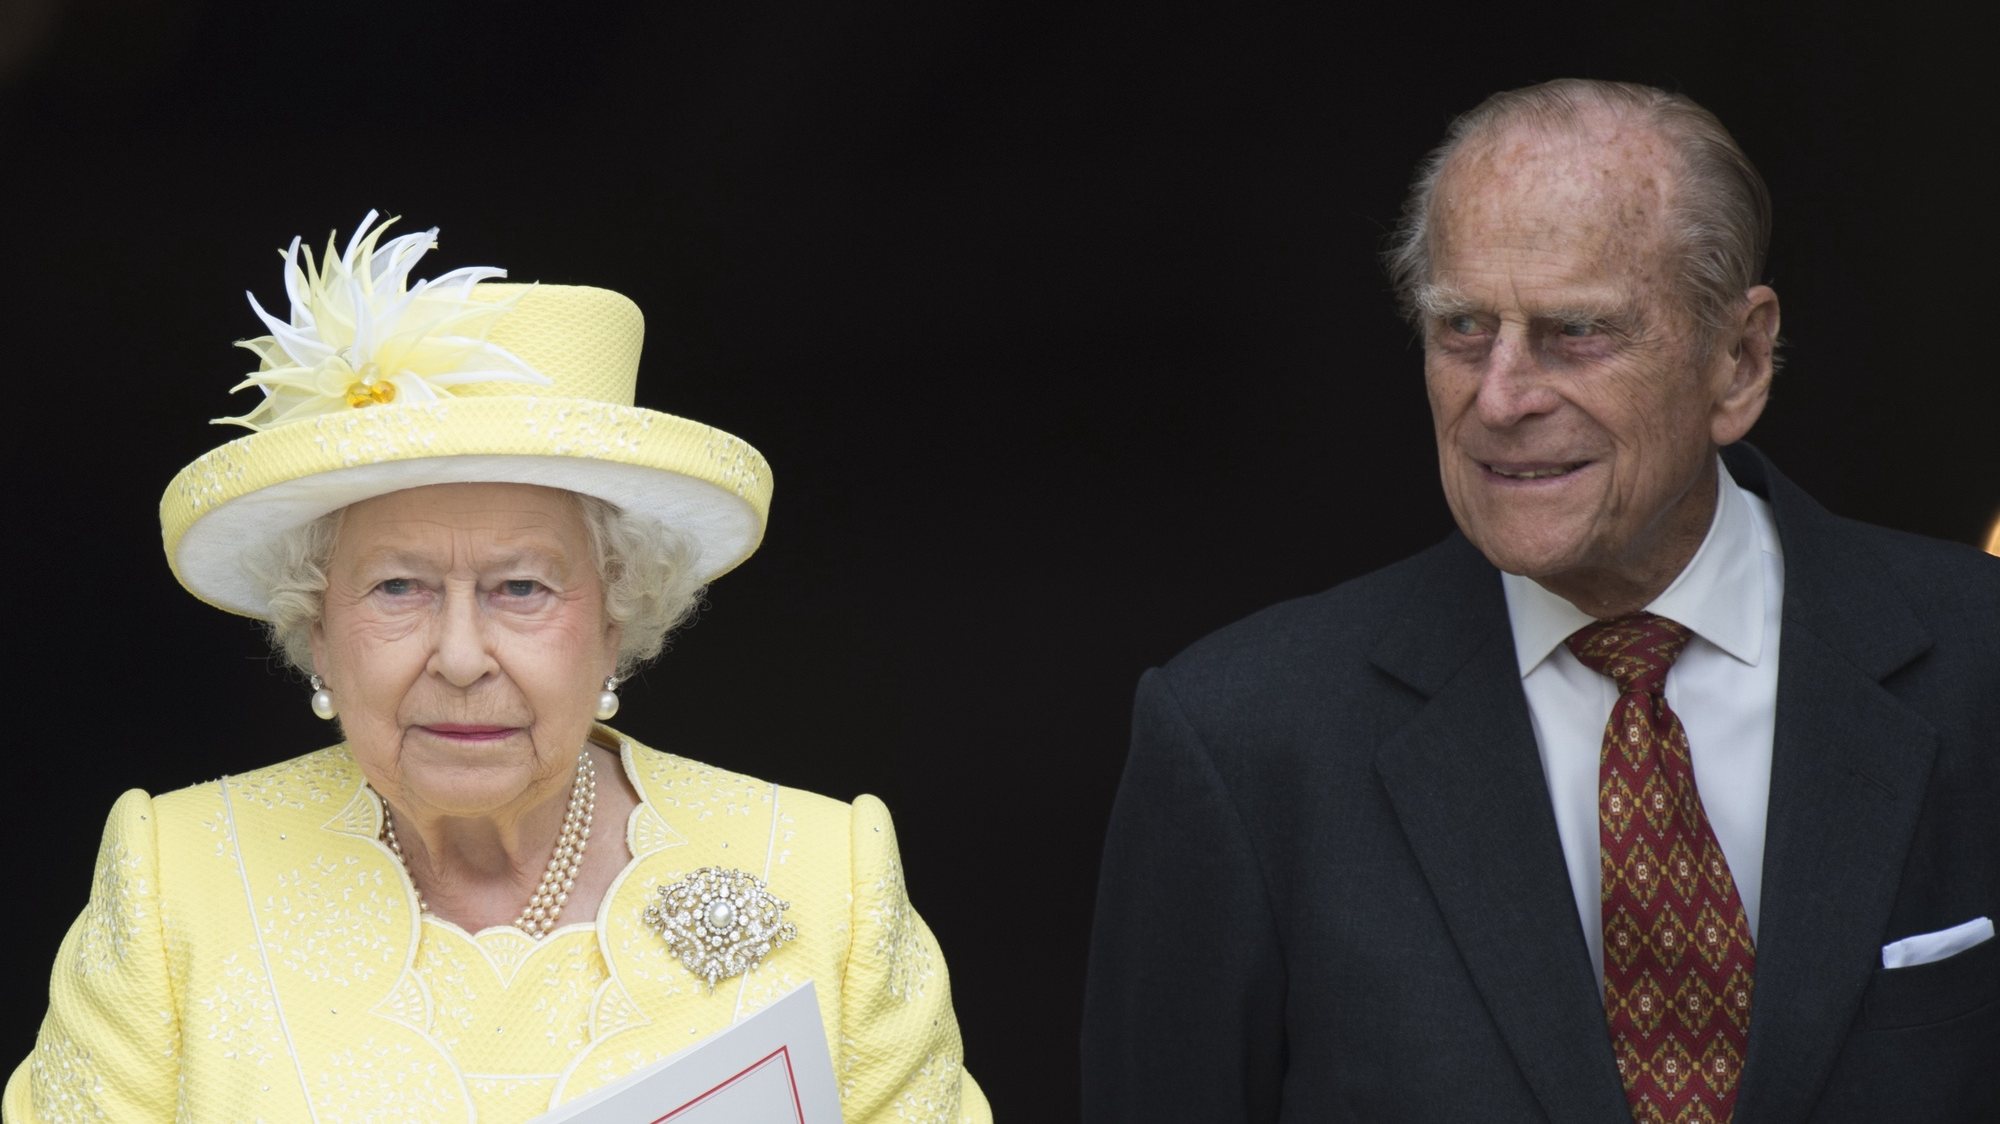 epa08928542 (FILE) - Britain&#039;s Queen Elizabeth II (L) and Prince Philip, The Duke of Edinburg, leave St. Paul&#039;s Cathedral in London, Britain, 10 June 2016 (reissued 09 January 2021). According to Buckingham palace, the royal couple have received vaccinations against COVID-19.  EPA/FACUNDO ARRIZABALAGA *** Local Caption *** 53893774